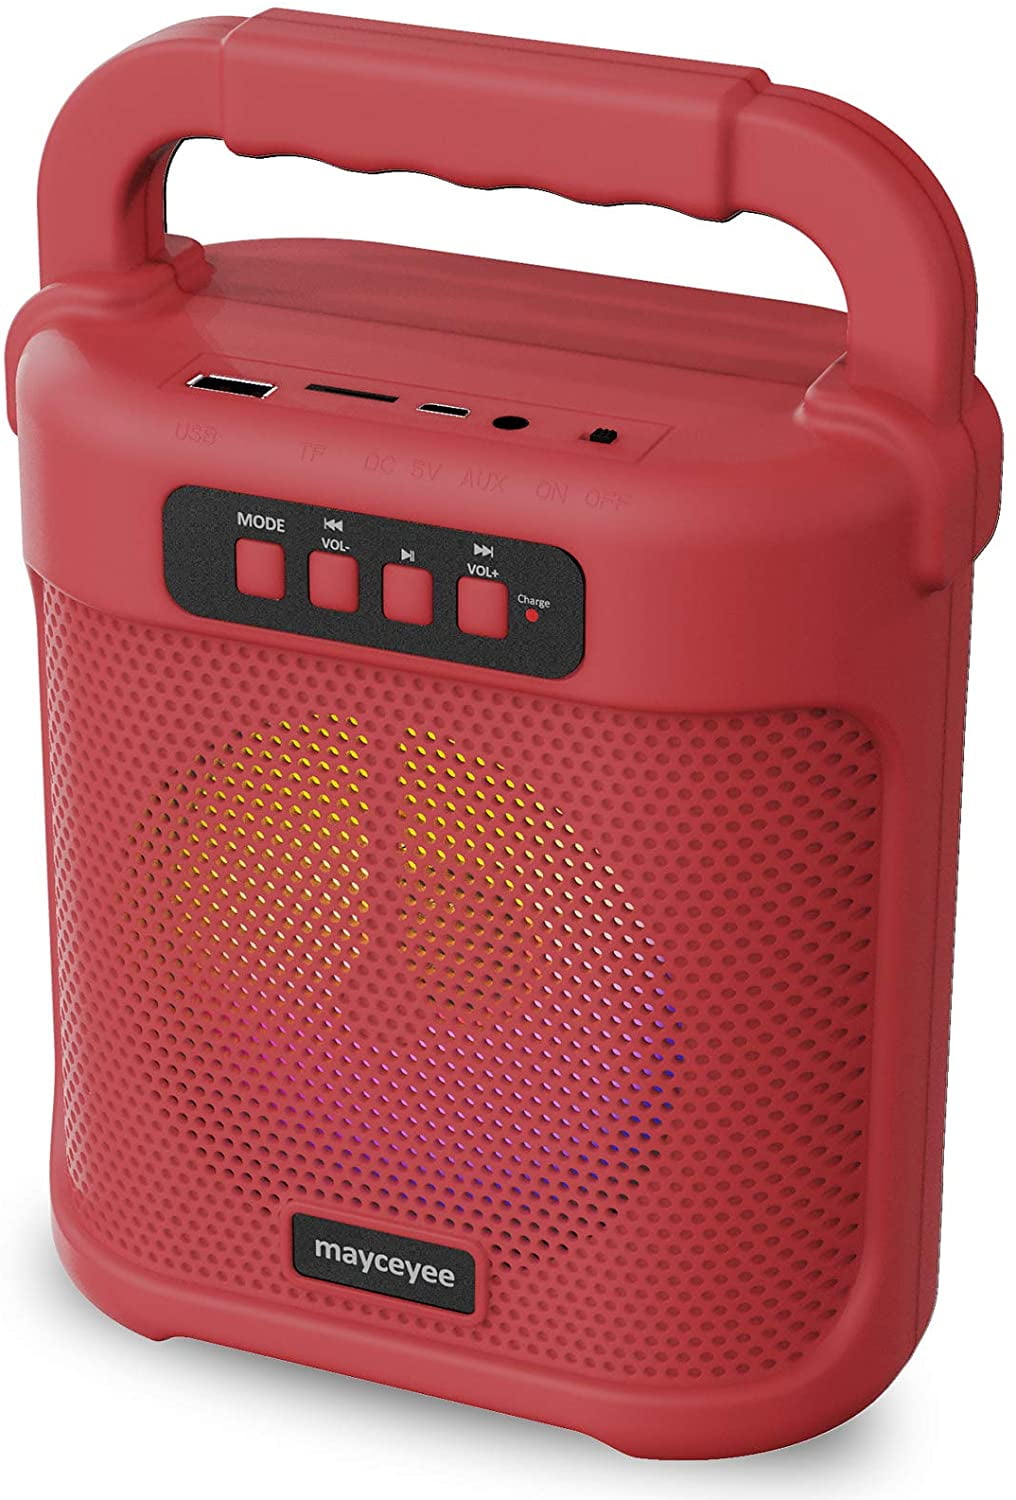 mayceyee Bluetooth Speaker with FM Radio, Rechargeable Portable Speaker with Led Light Flash, USB and Micro SD Card Input and Stero Wireless Speaker for Gatherings, Outdoor and Gym - Red -